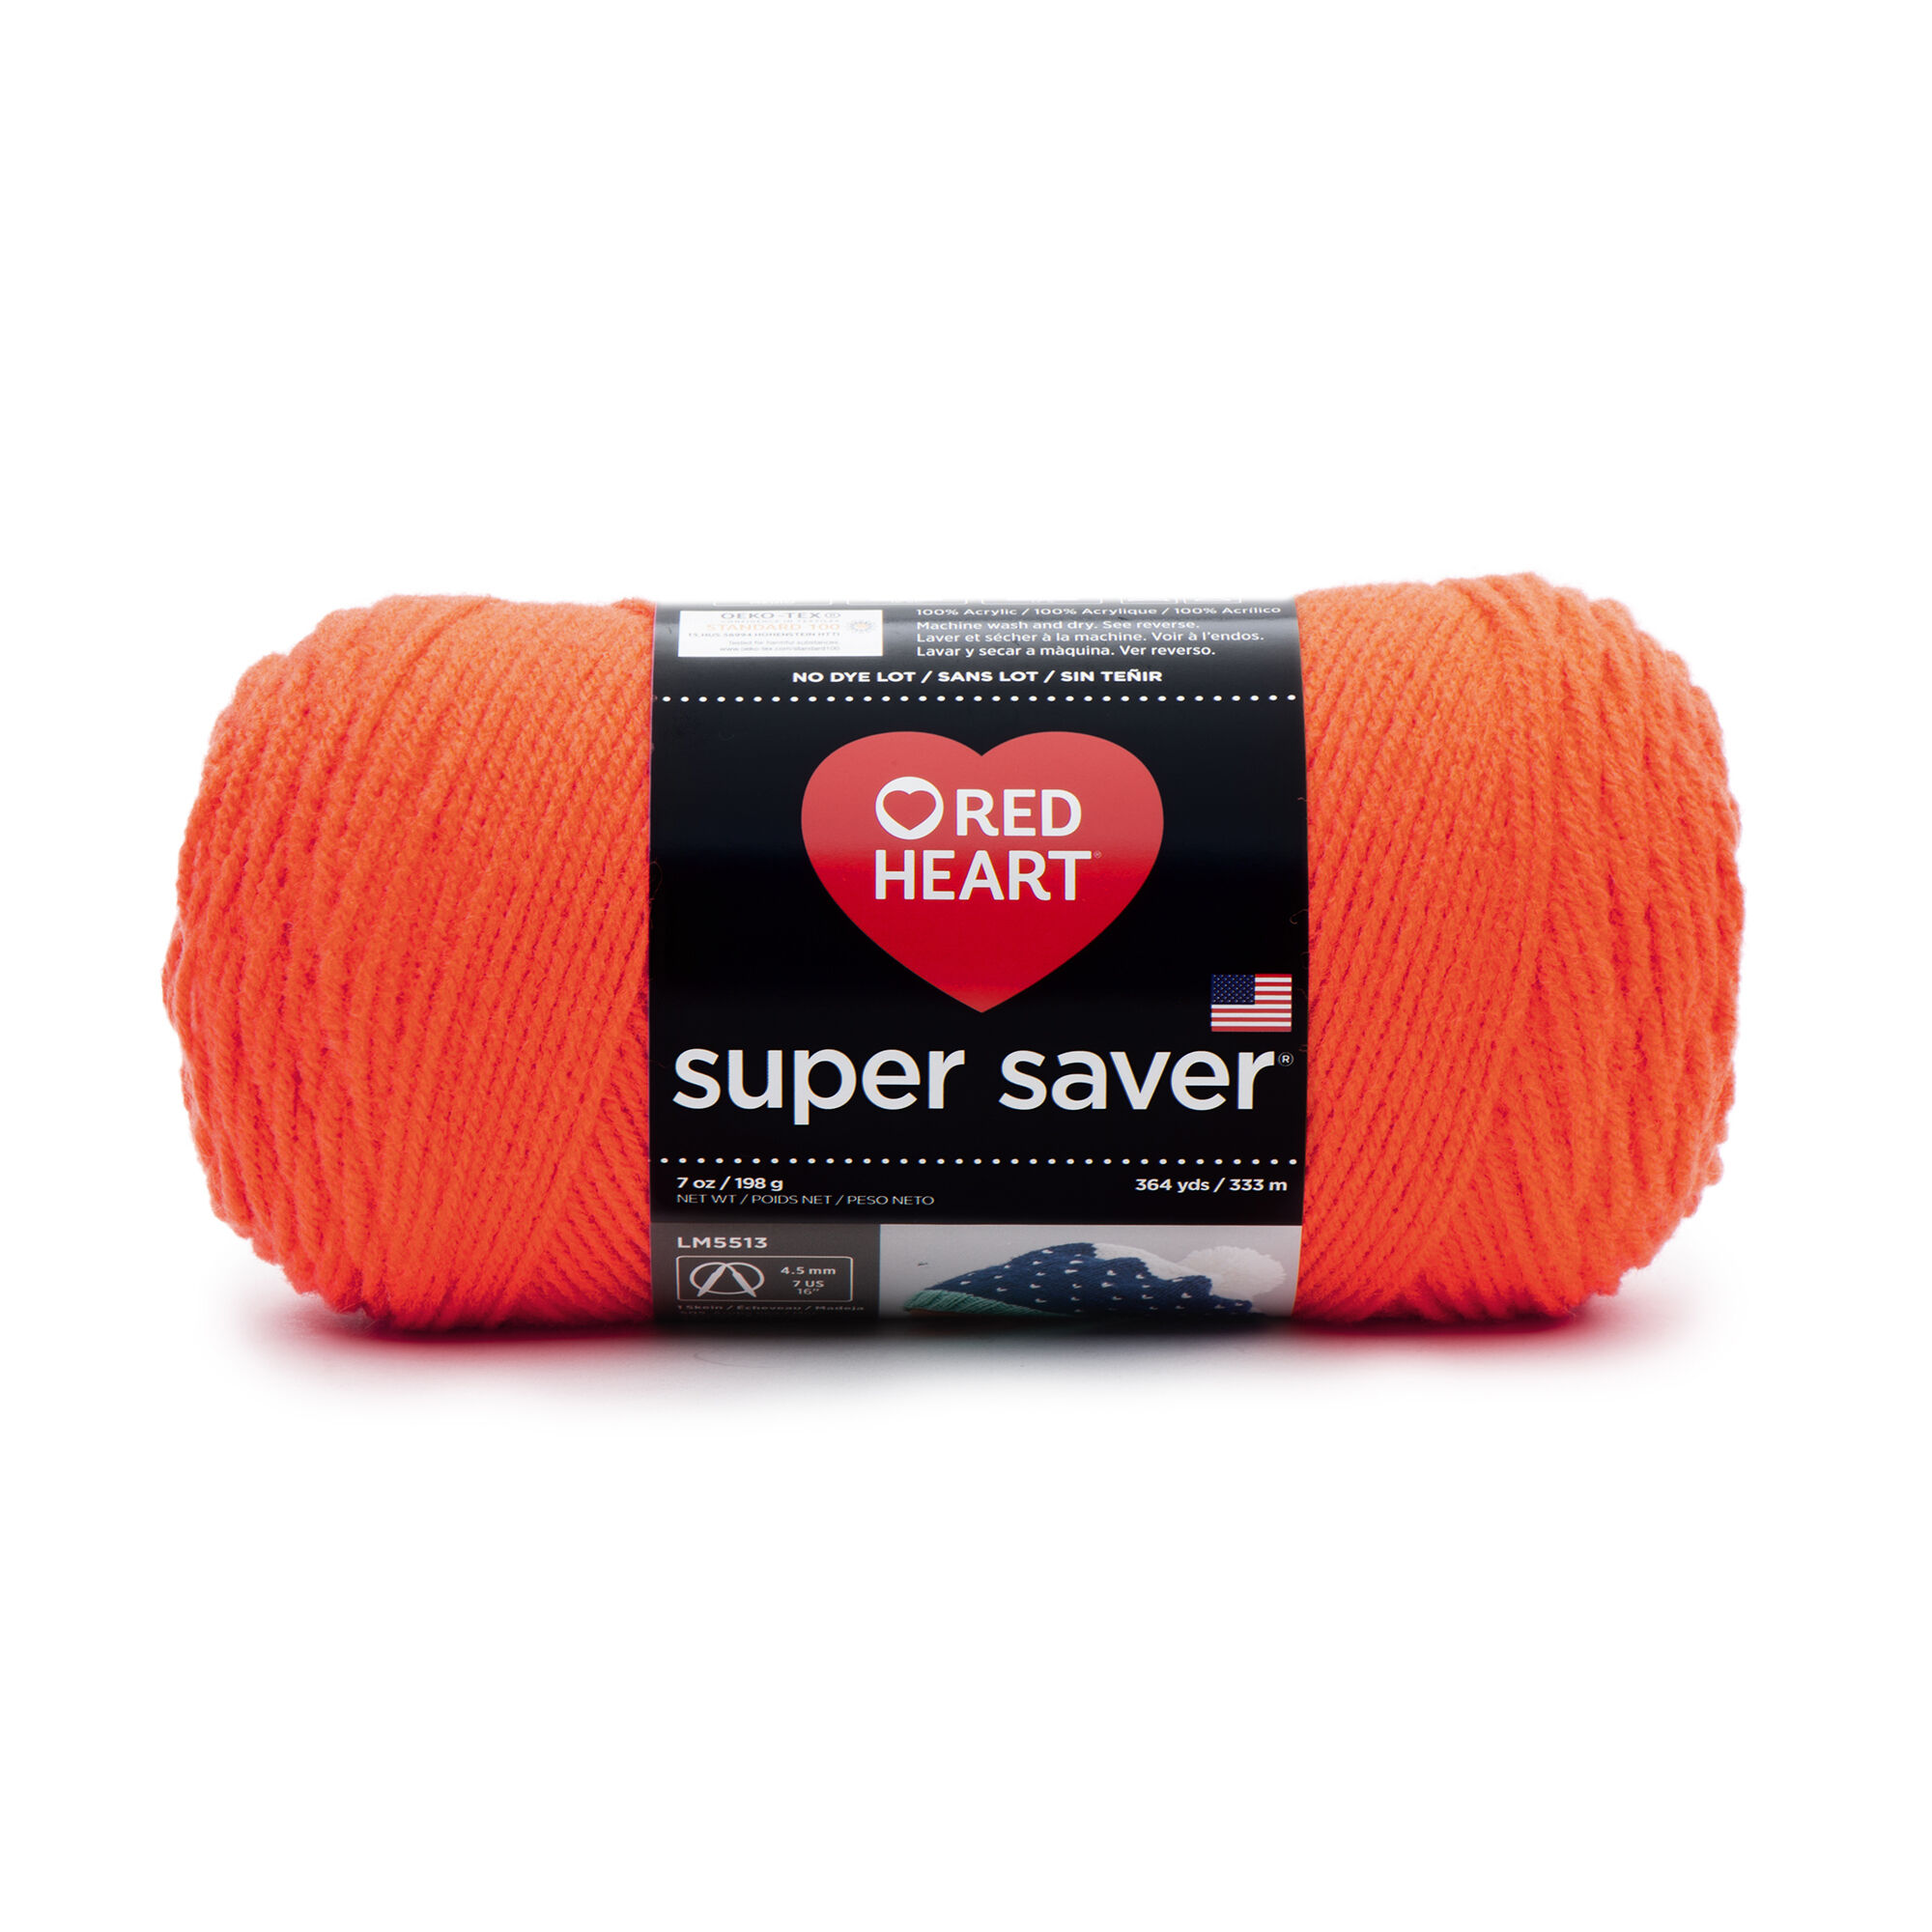 Red Heart Super Saver Yarn, Flame - image 1 of 16